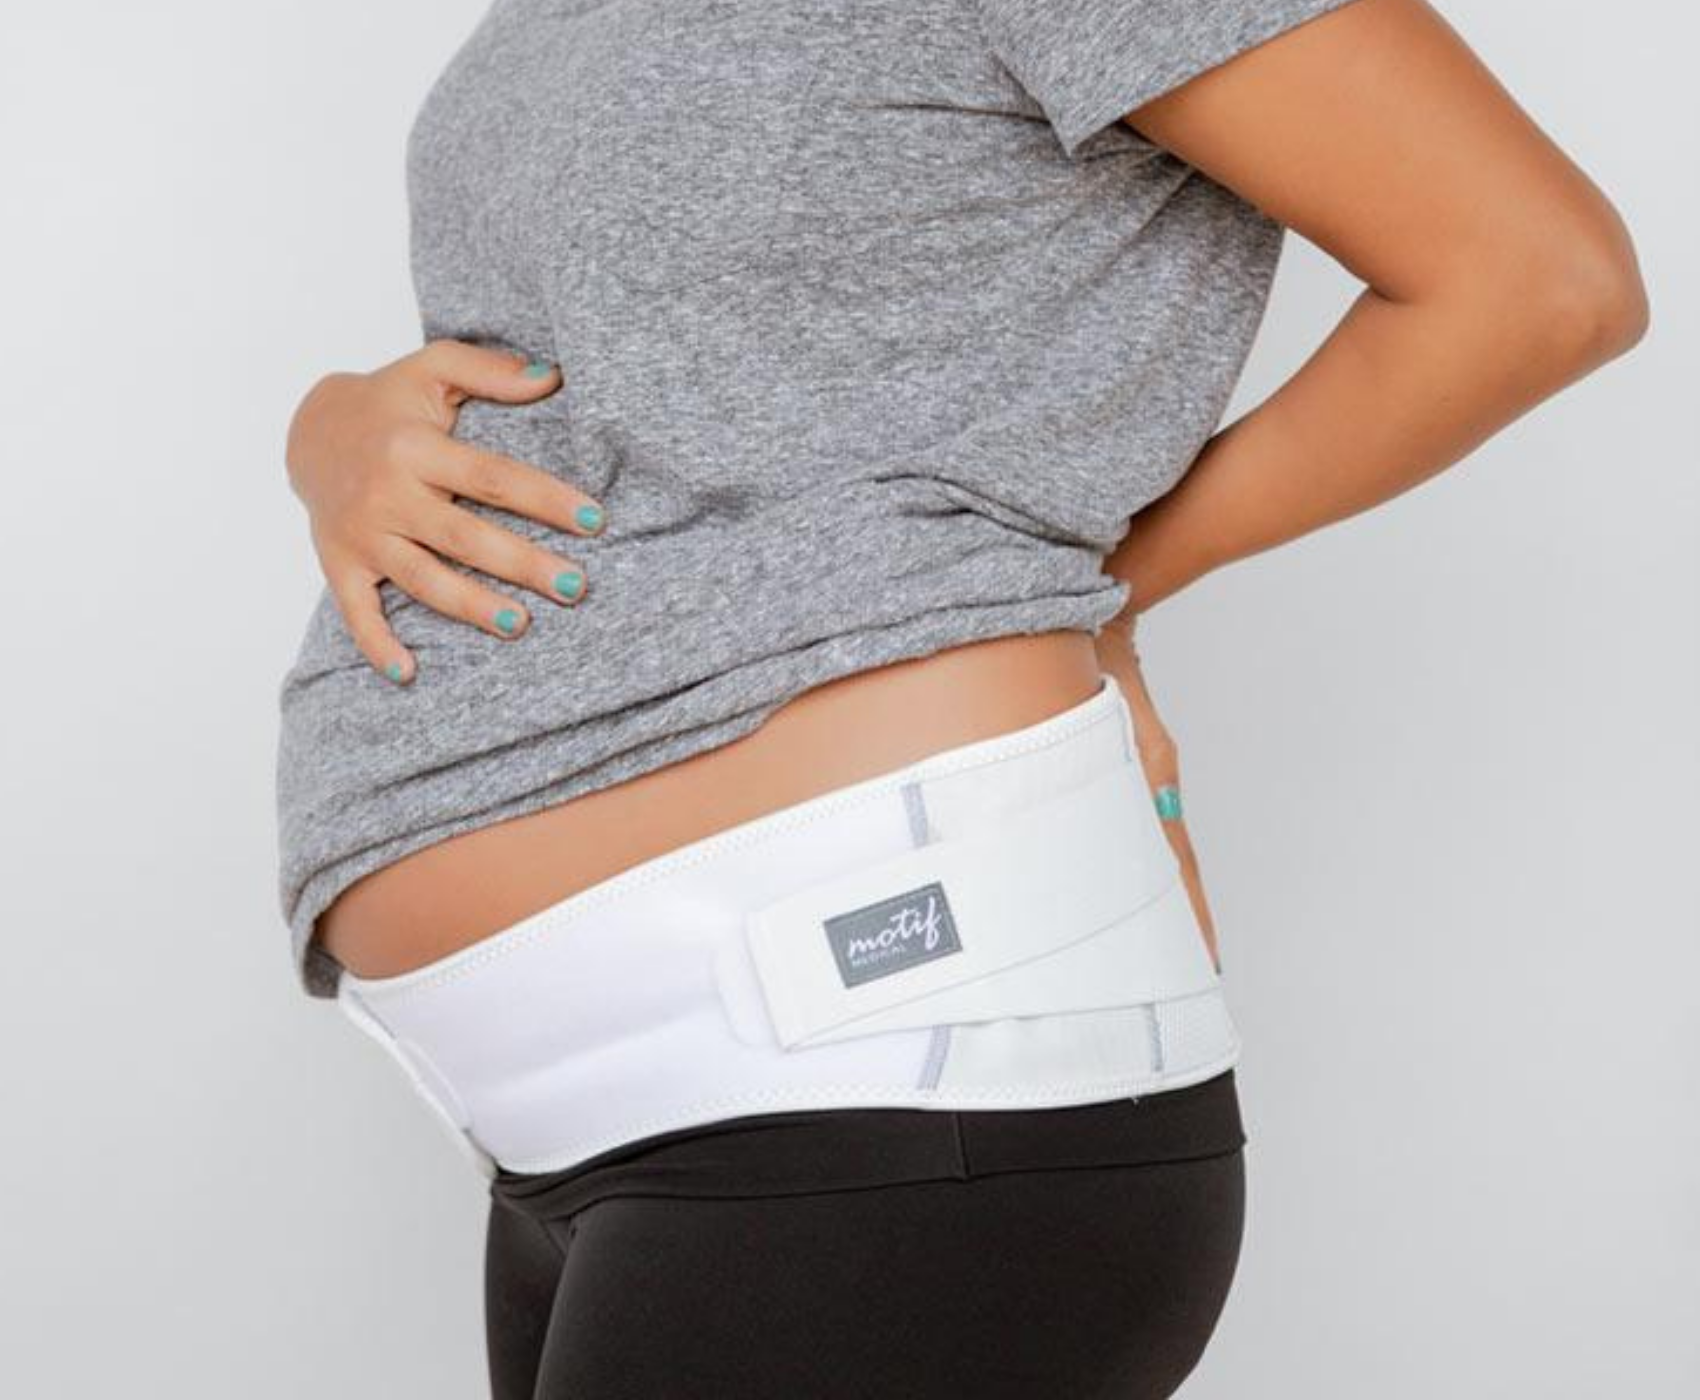 Pregnancy Support Maternity Belt - Healthcare Supply